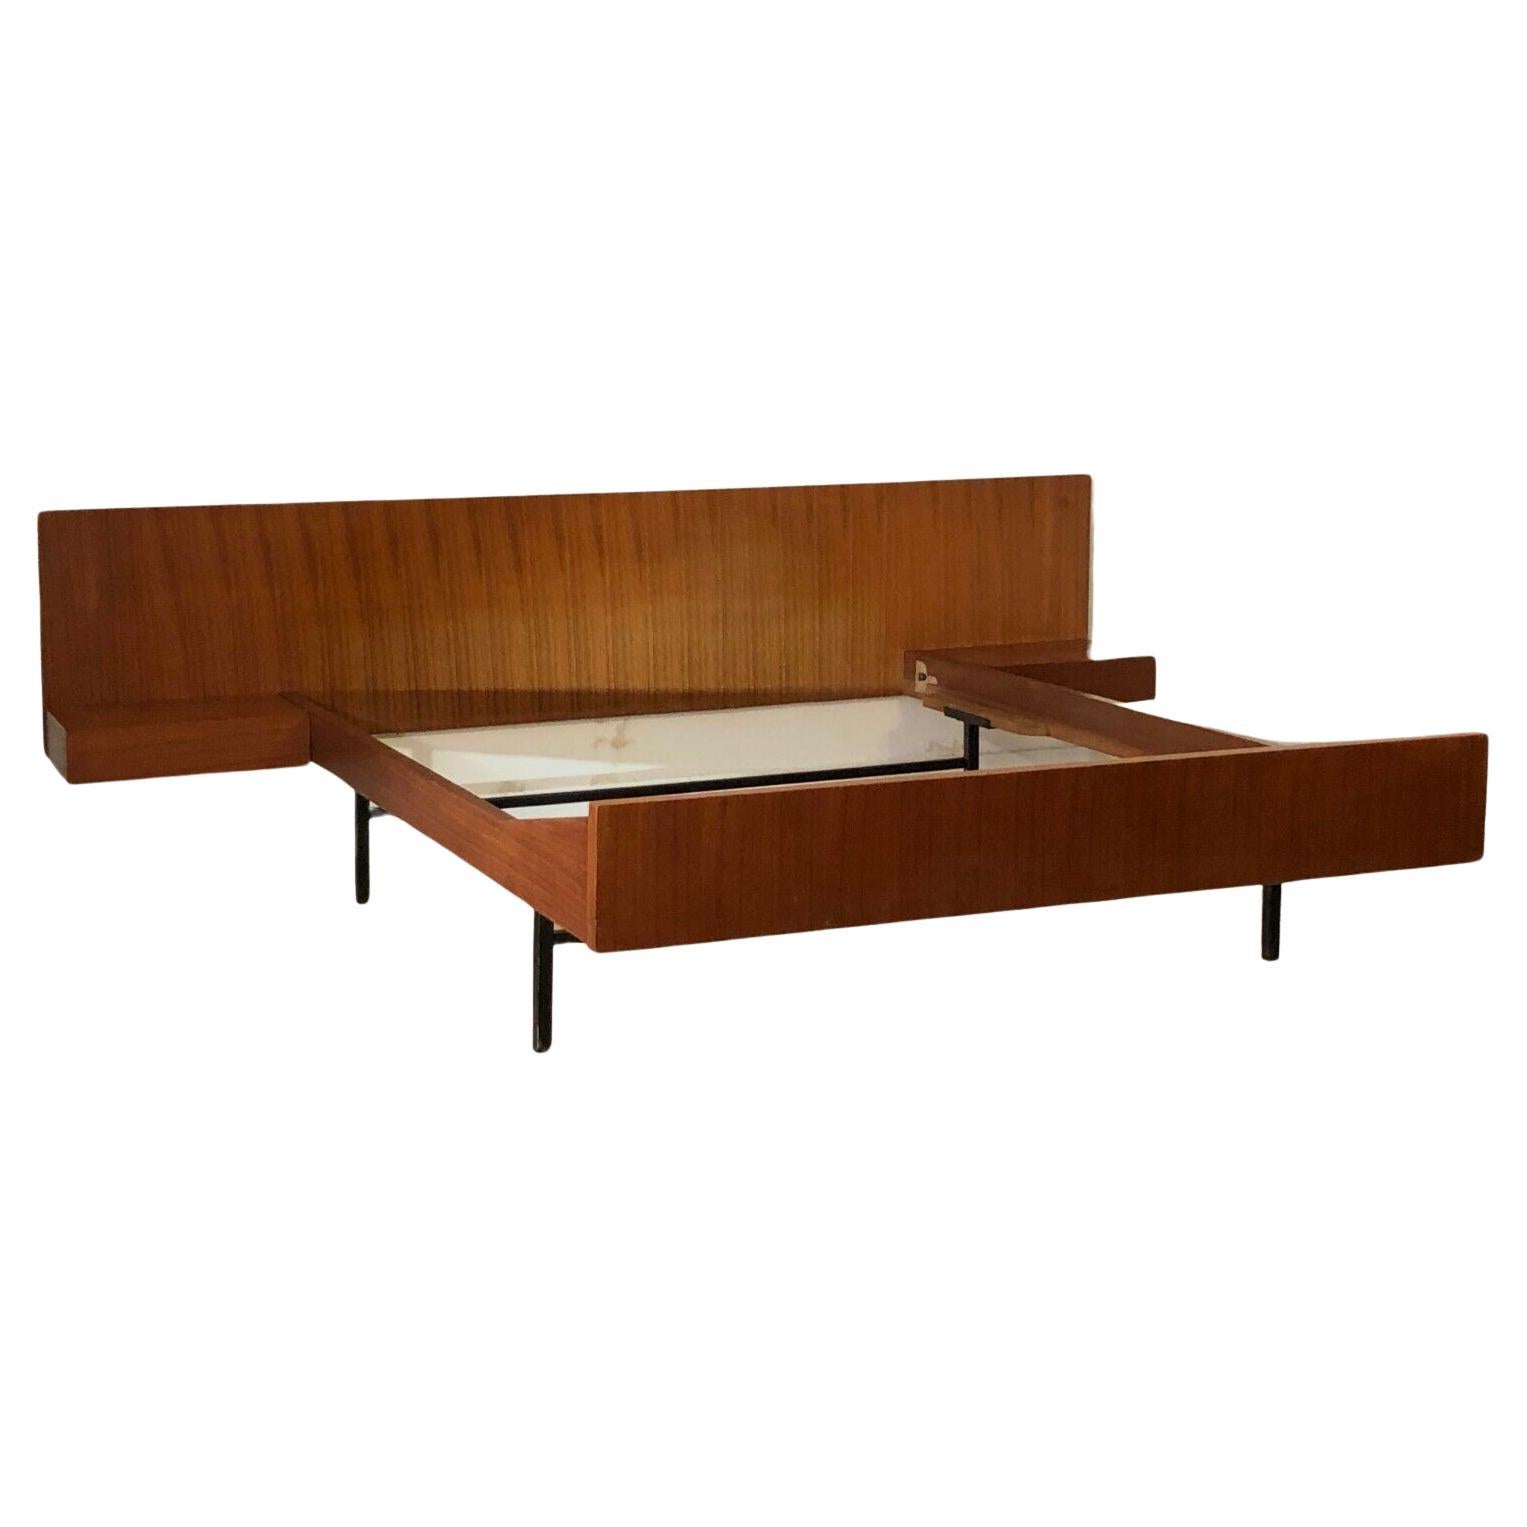 A MID-CENTURY-MODERN Double Bed by JOSEPH-ANDRE MOTTE, CHARRON, France 1950 For Sale